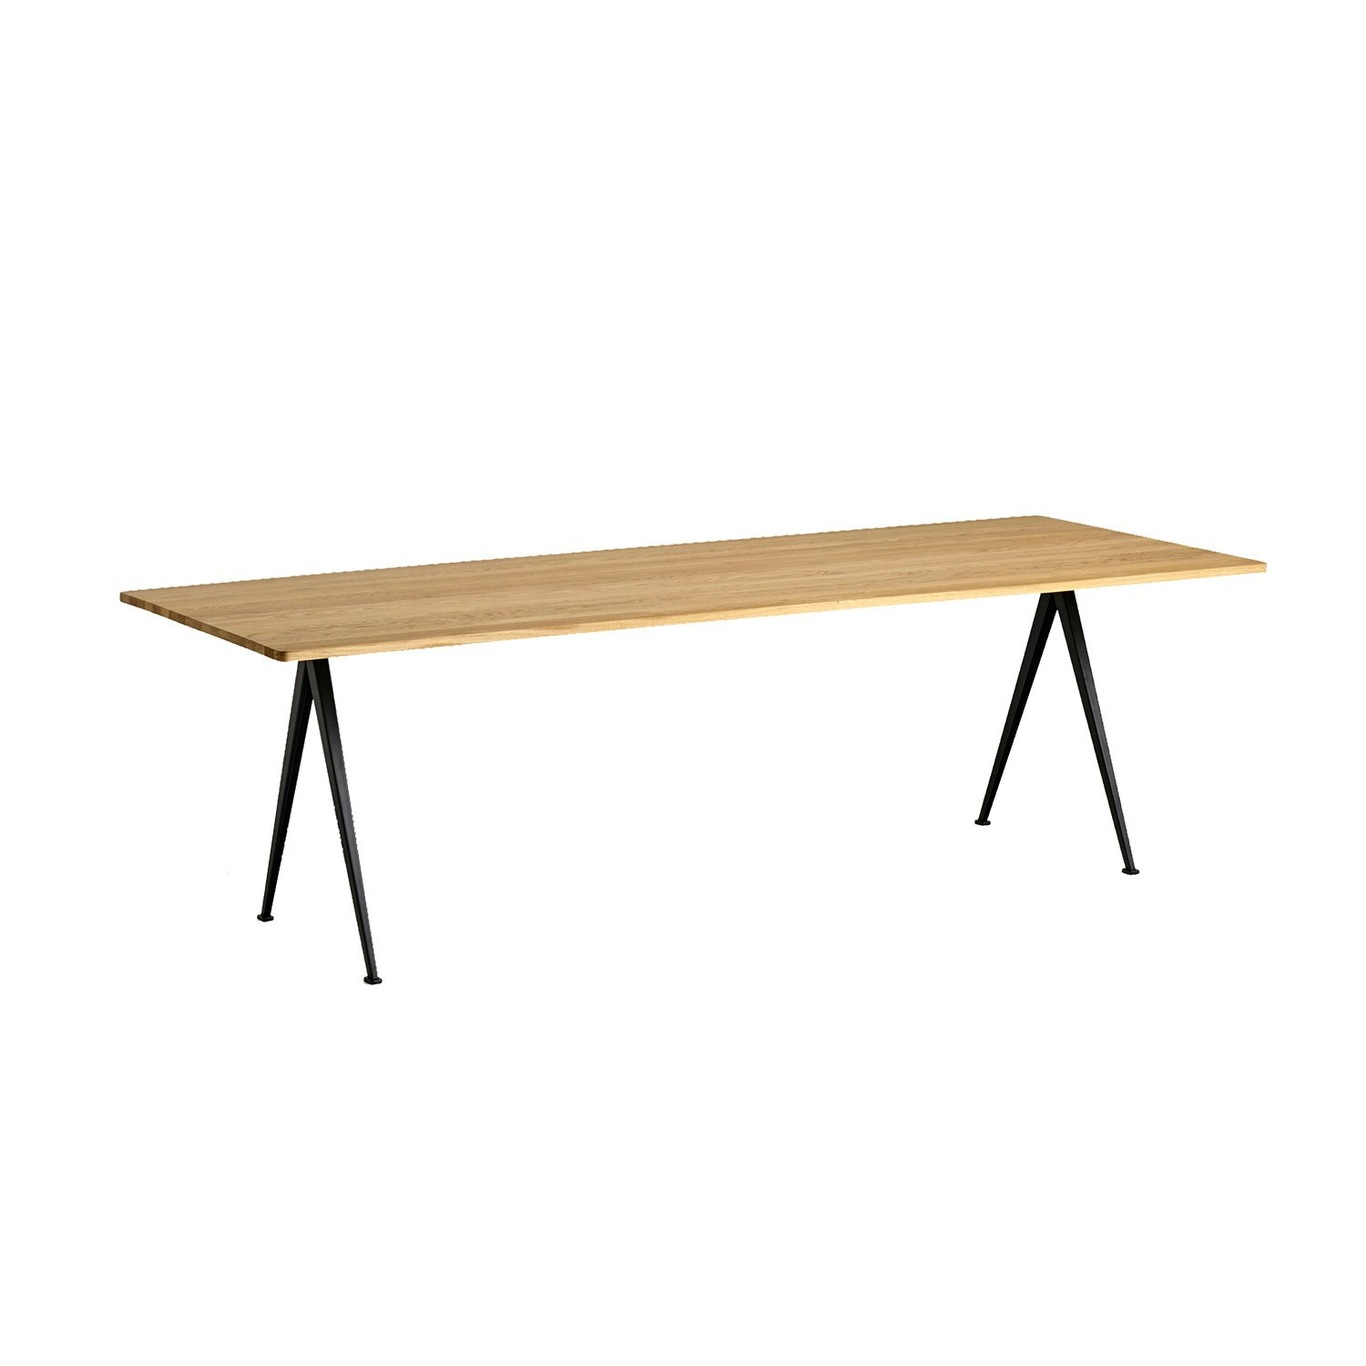 Pyramid 02 Dining Table 85x250cm, Black / Lacquered Oak